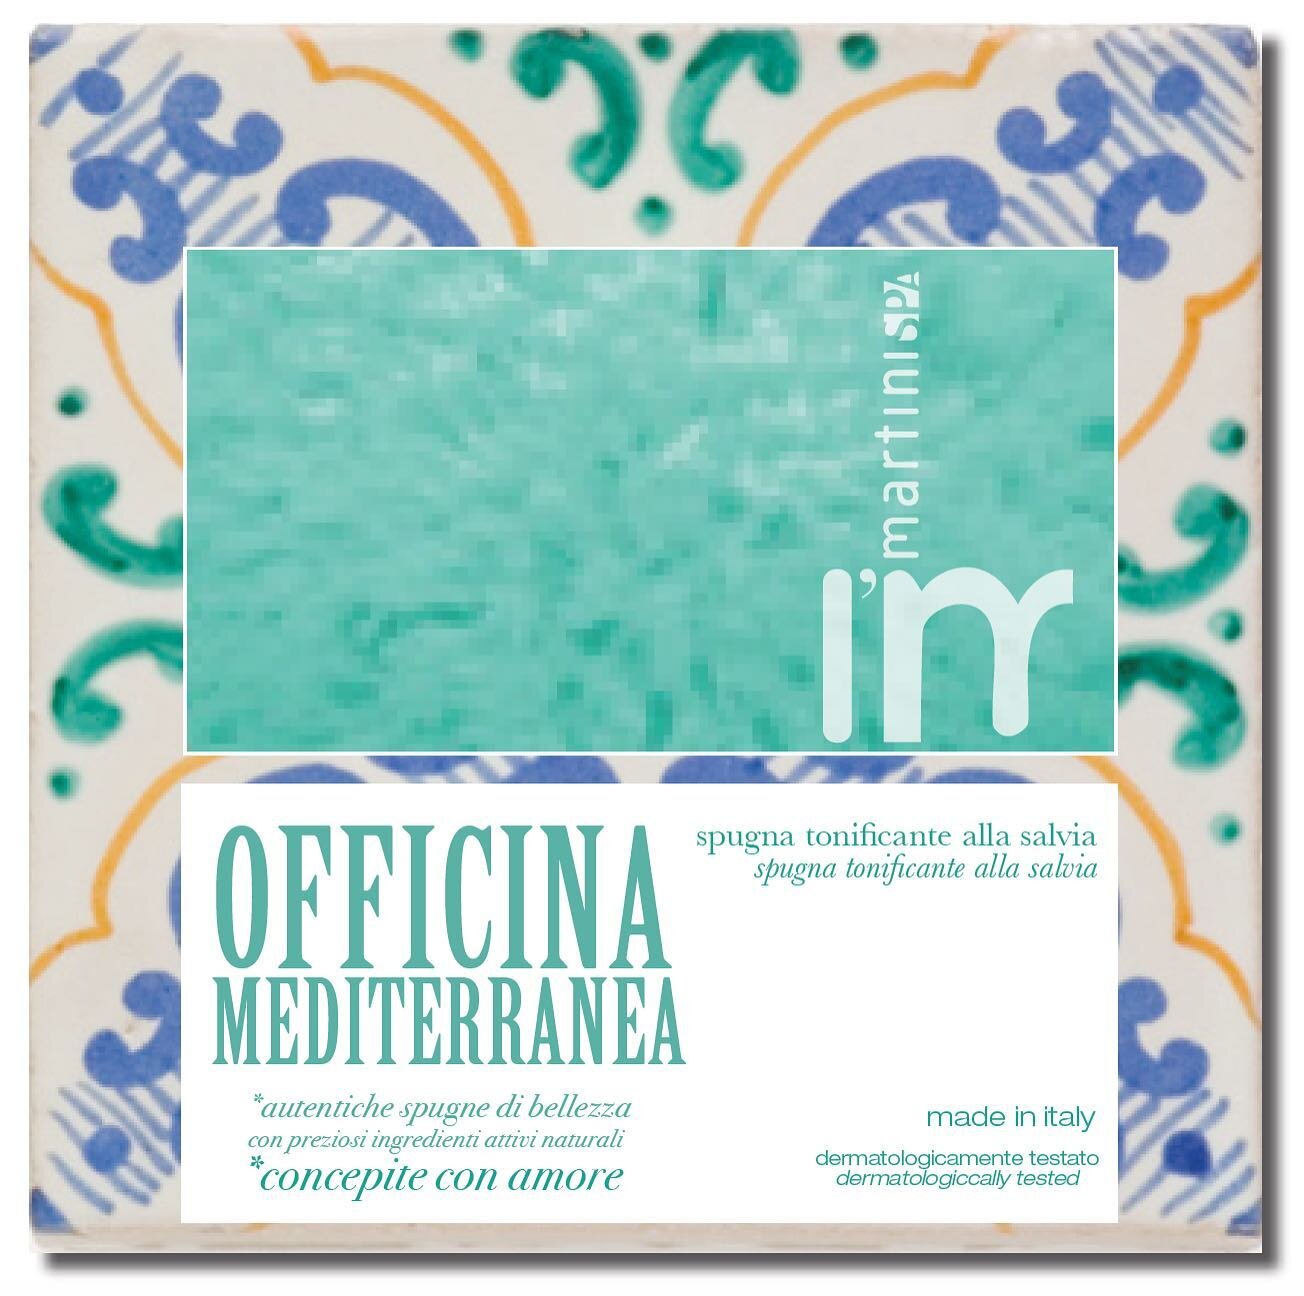 Mediterranean cosmetica concept #graphicdesign #sea #storytelling #naming